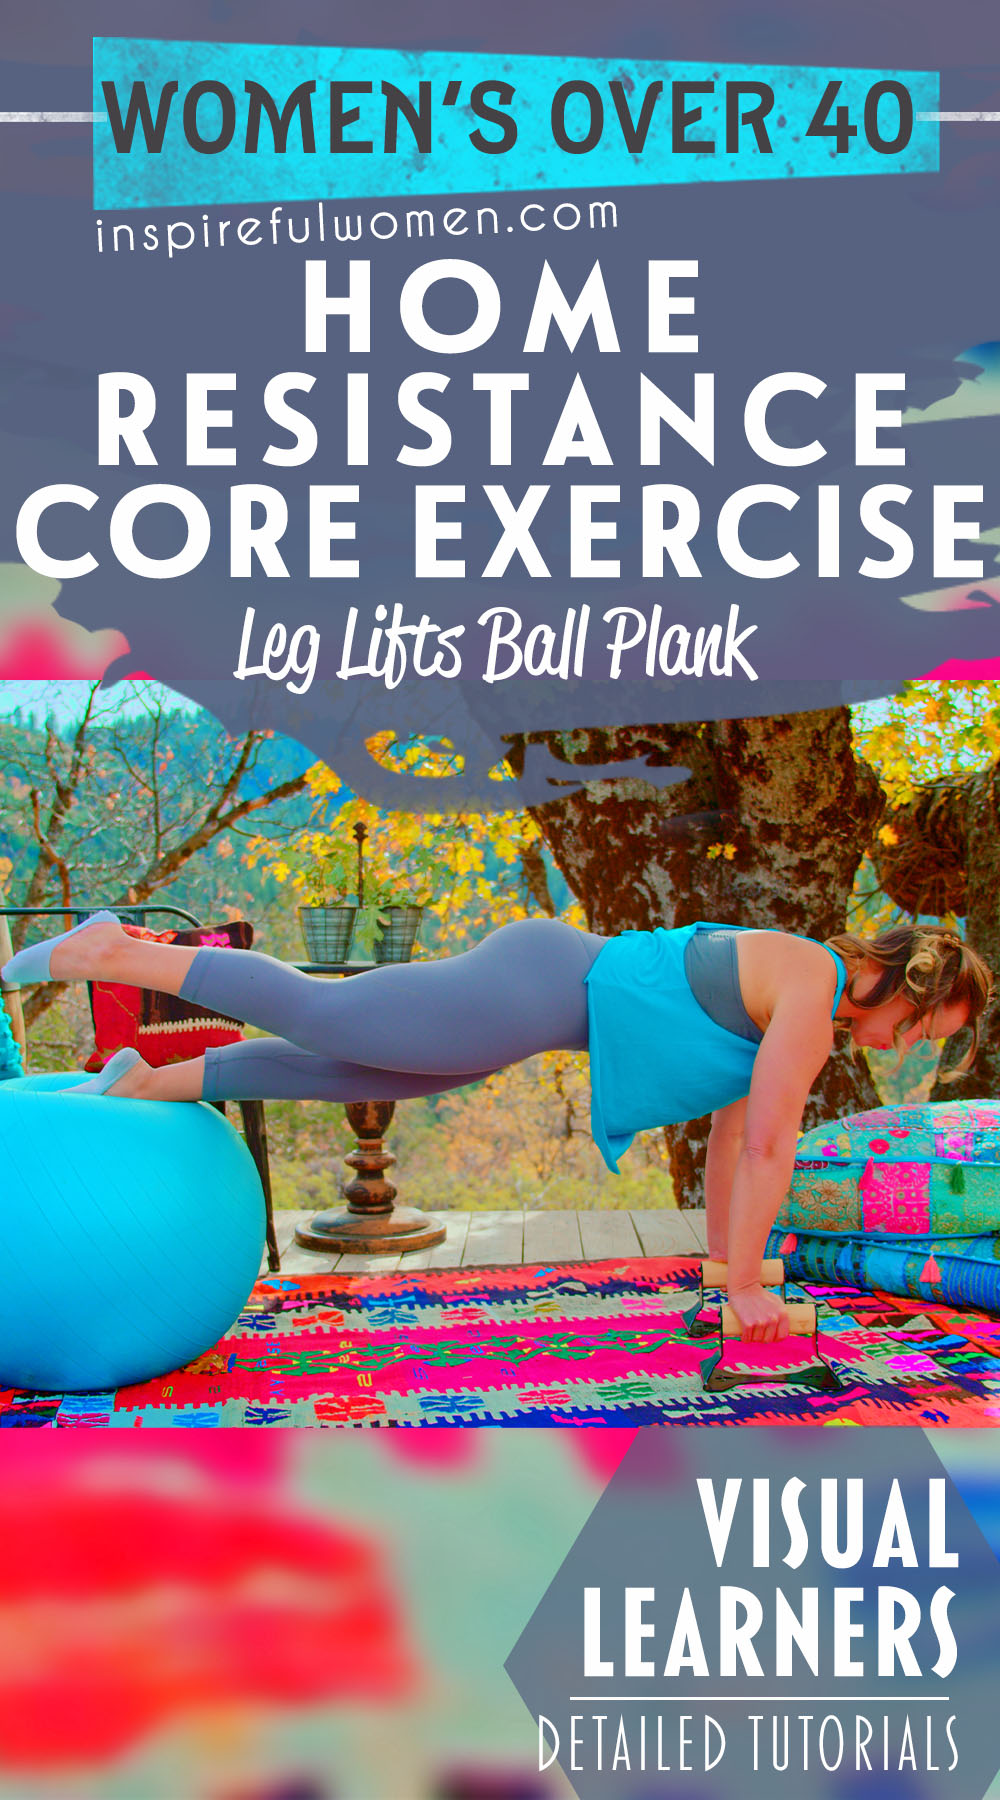 leg-lifts-stability-ball-plank-neutral-spine-bodyweight-core-abs-exercise-women-40+